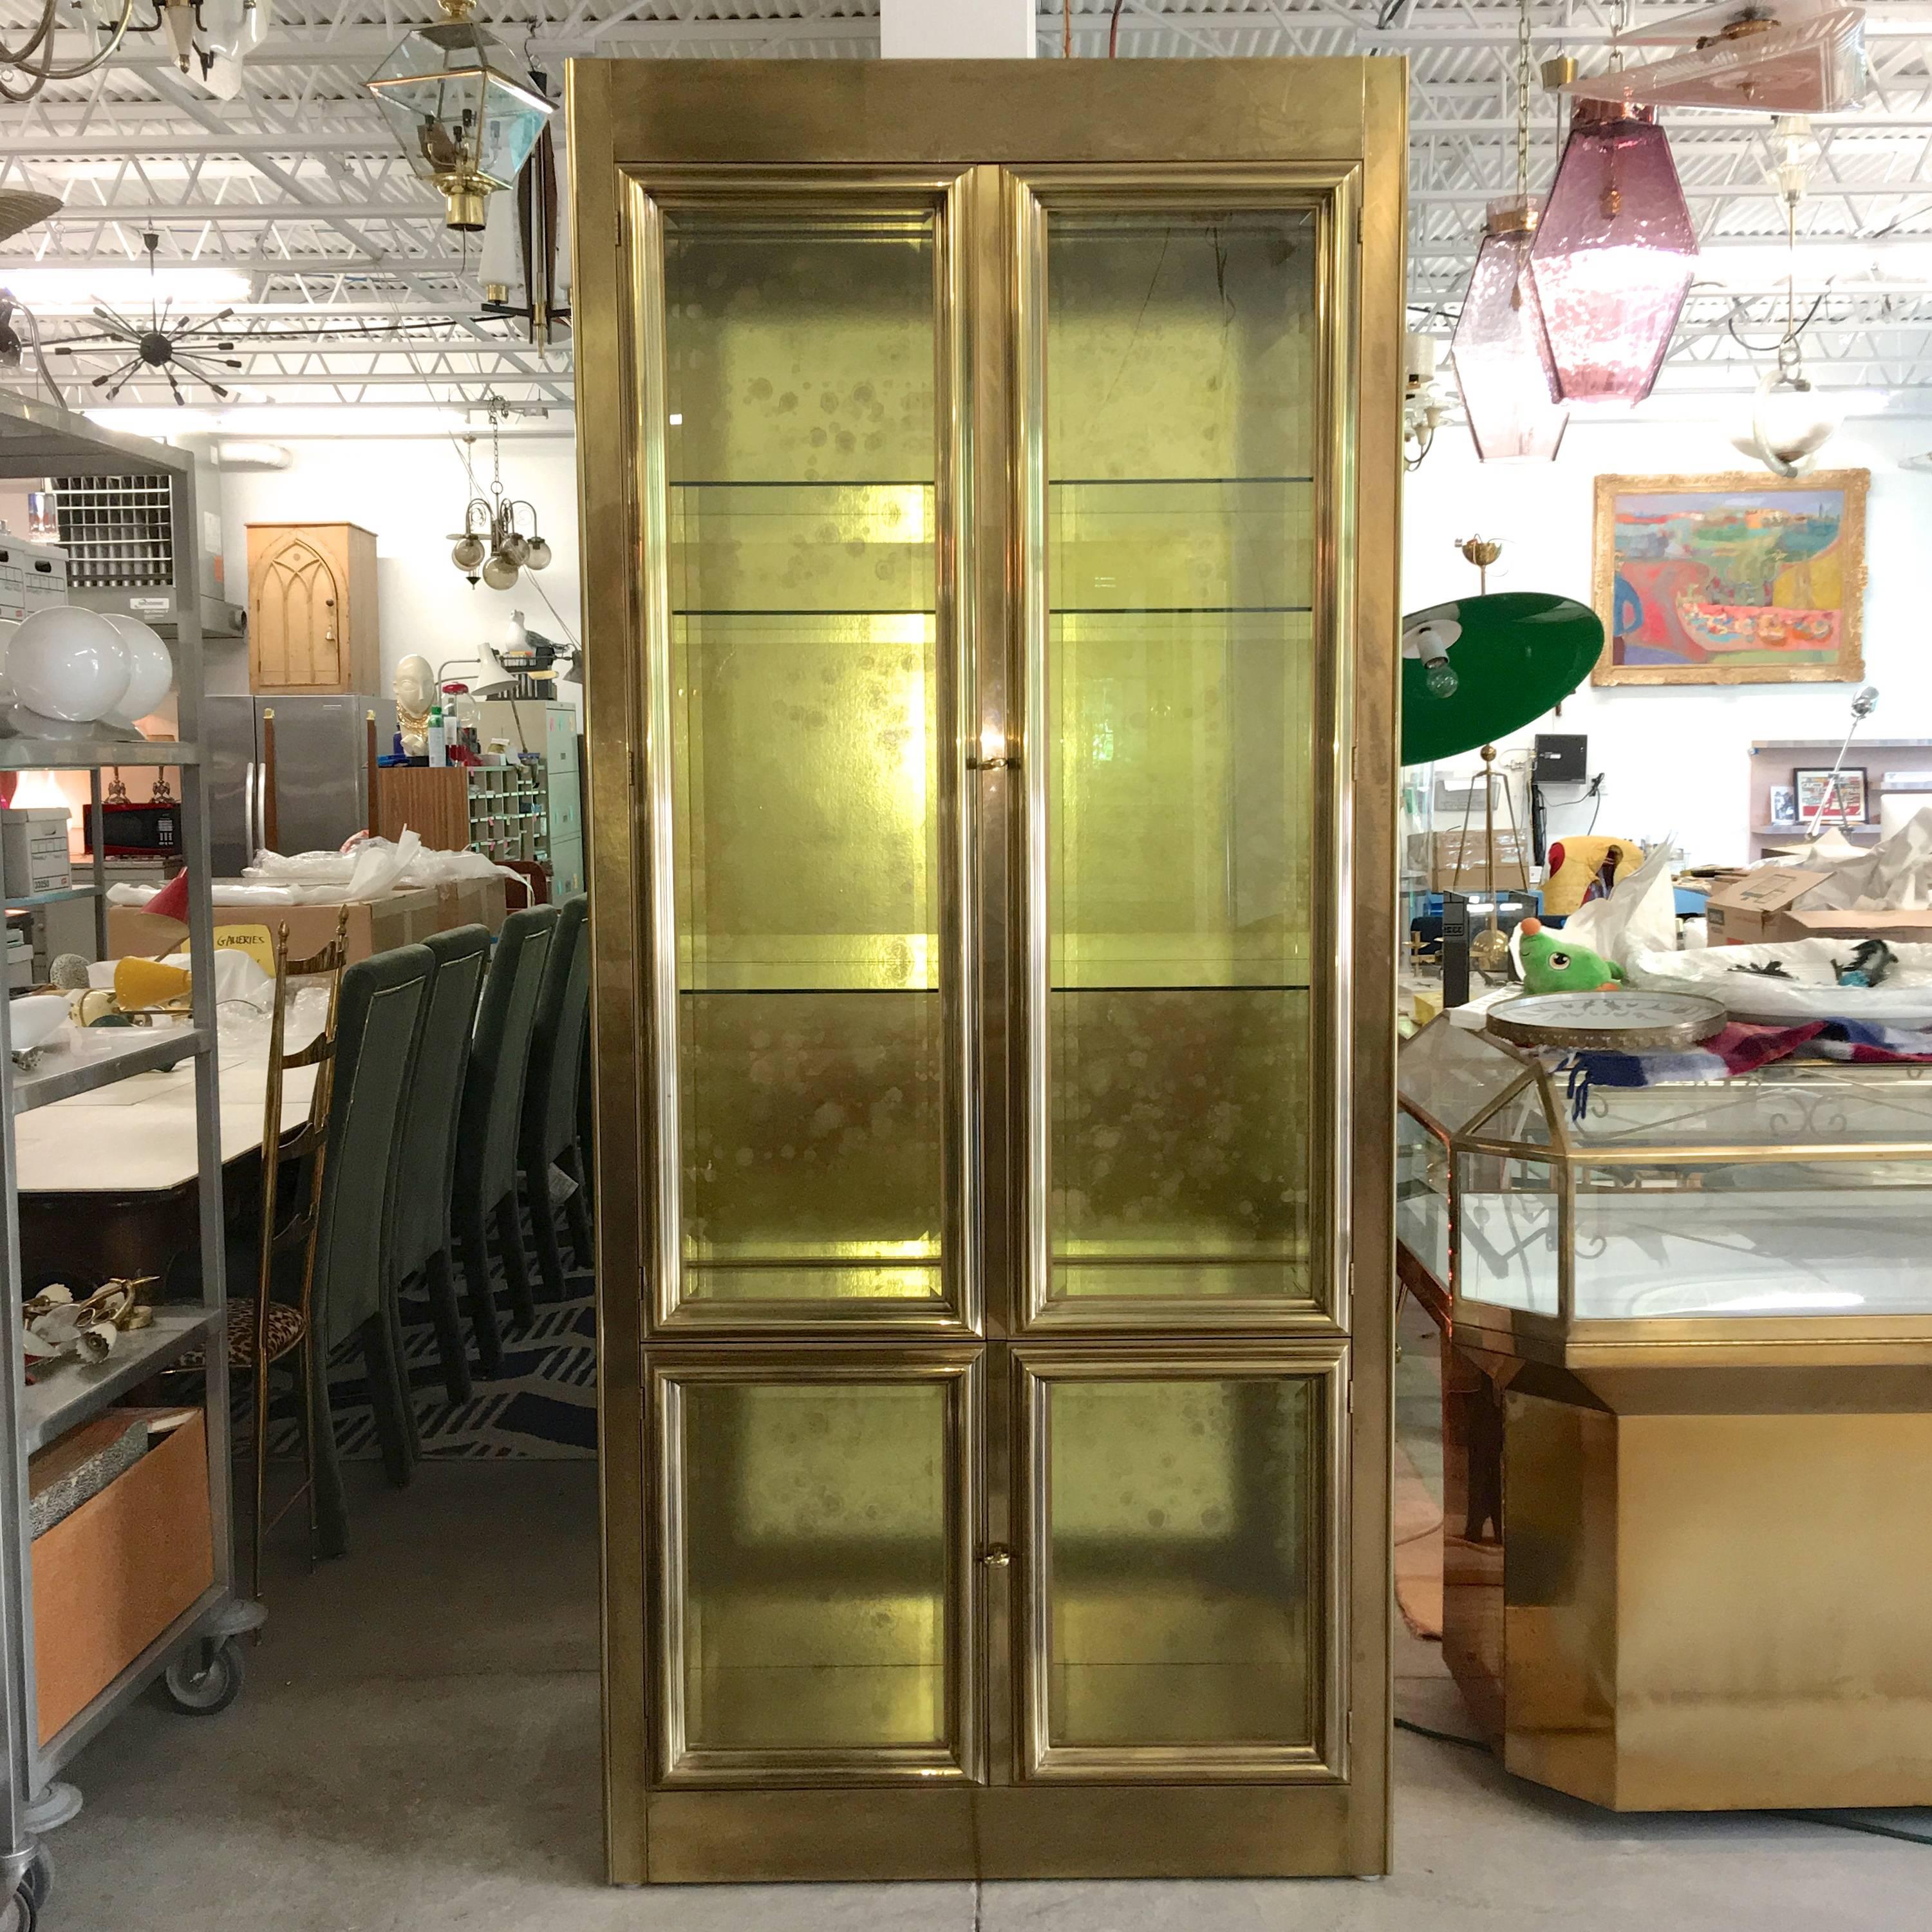 Mastercraft brass and glass four door vitrine with dimmable overhead lights. Large double doors over small double doors, both with clear beveled glass. Beveled glass window sidelights. Gold foiled backboard. Three adjustable shelves with etched